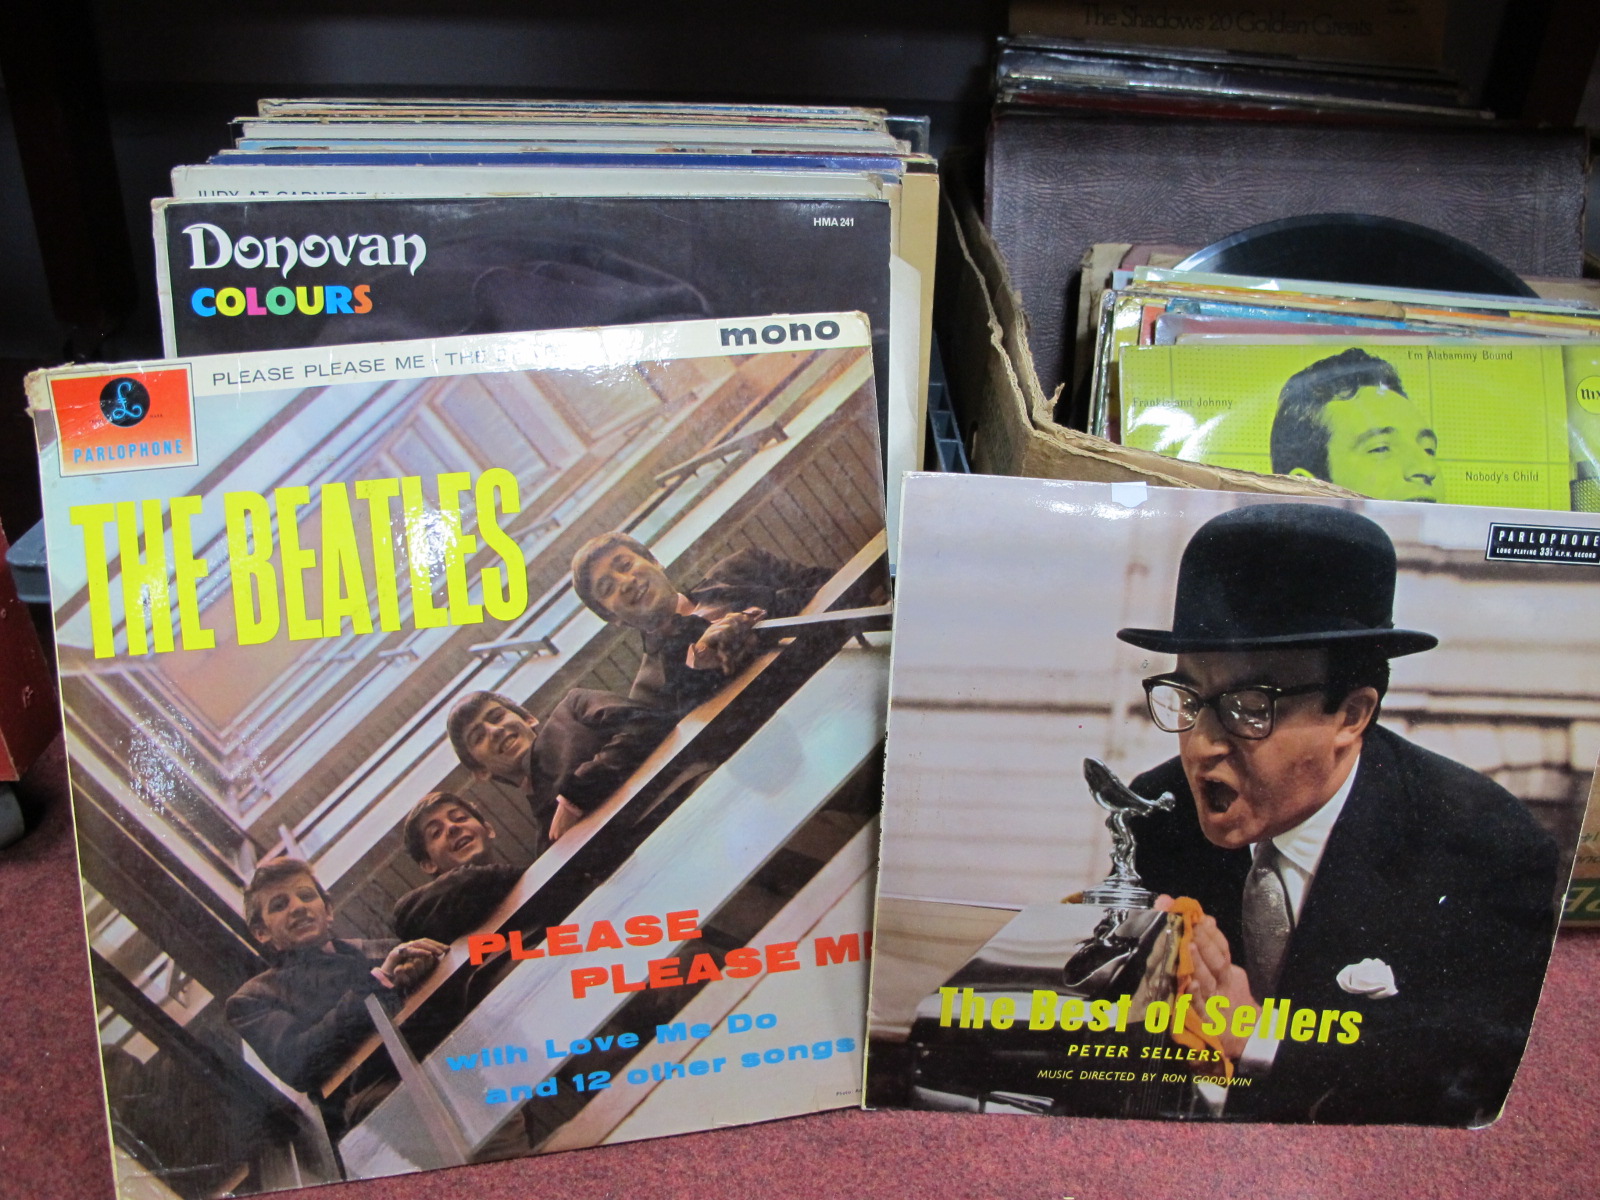 LP Records, including:- Beatles, Alan Bown, Donovan, Rugby Songs, Cliff Richard, Orchestral, etc:-